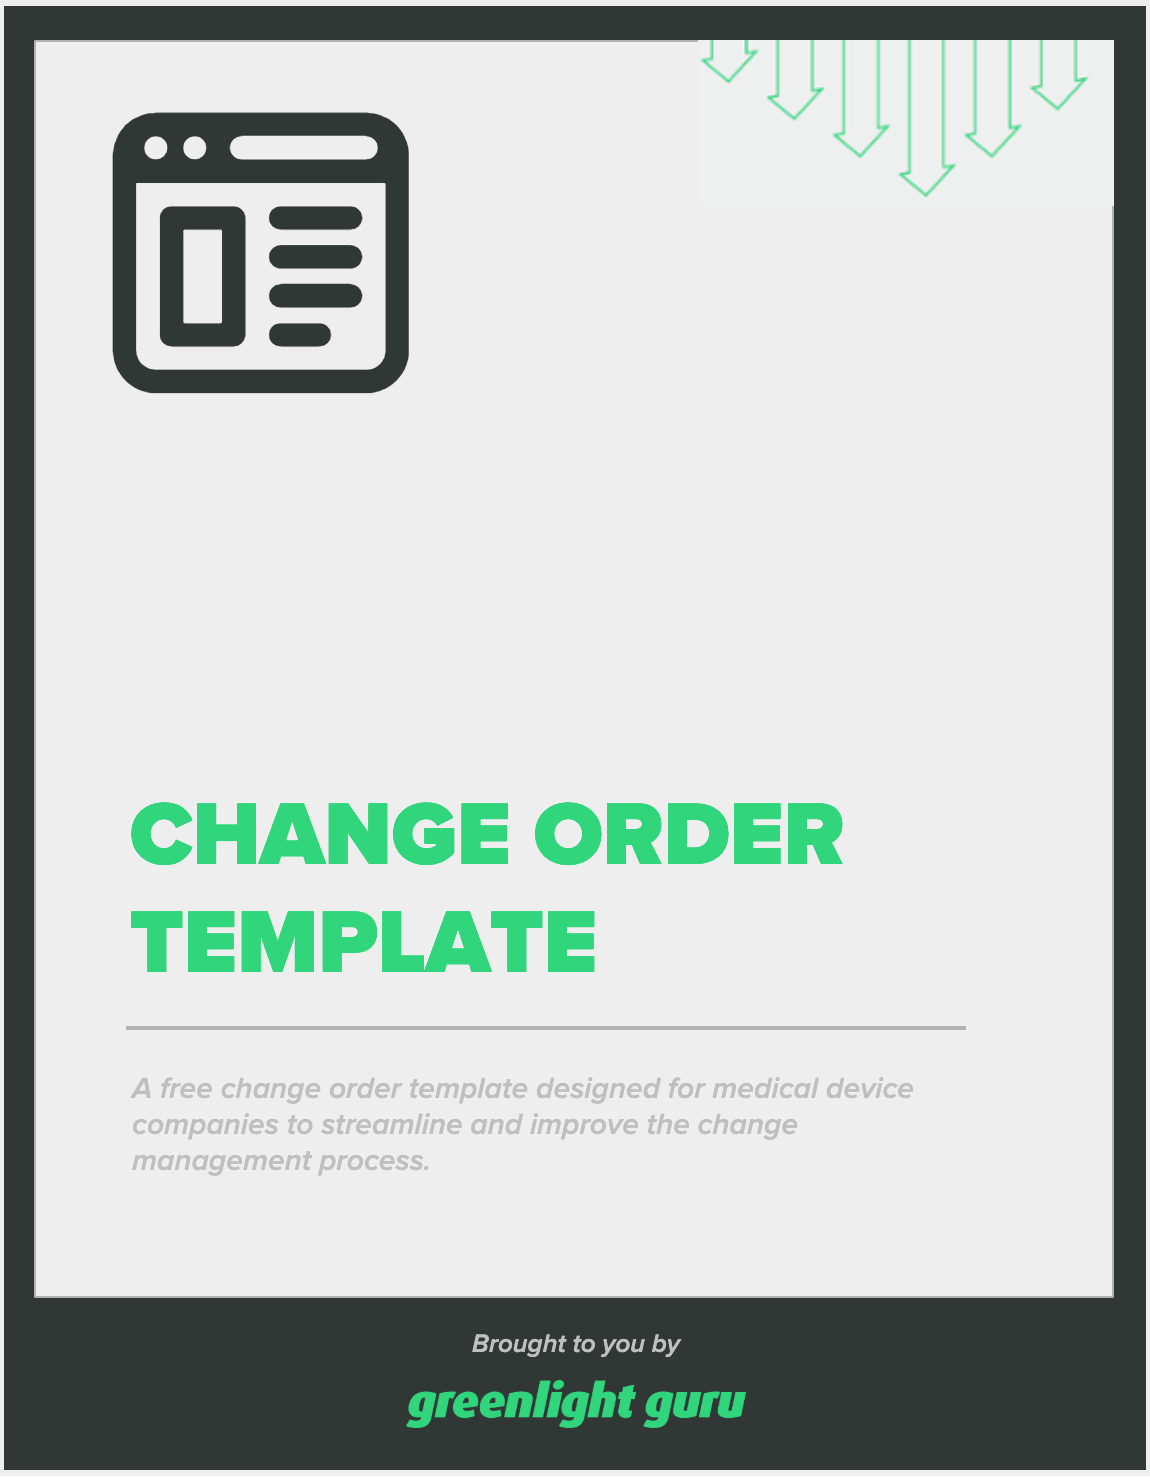 Change order template - slide-in cover-1